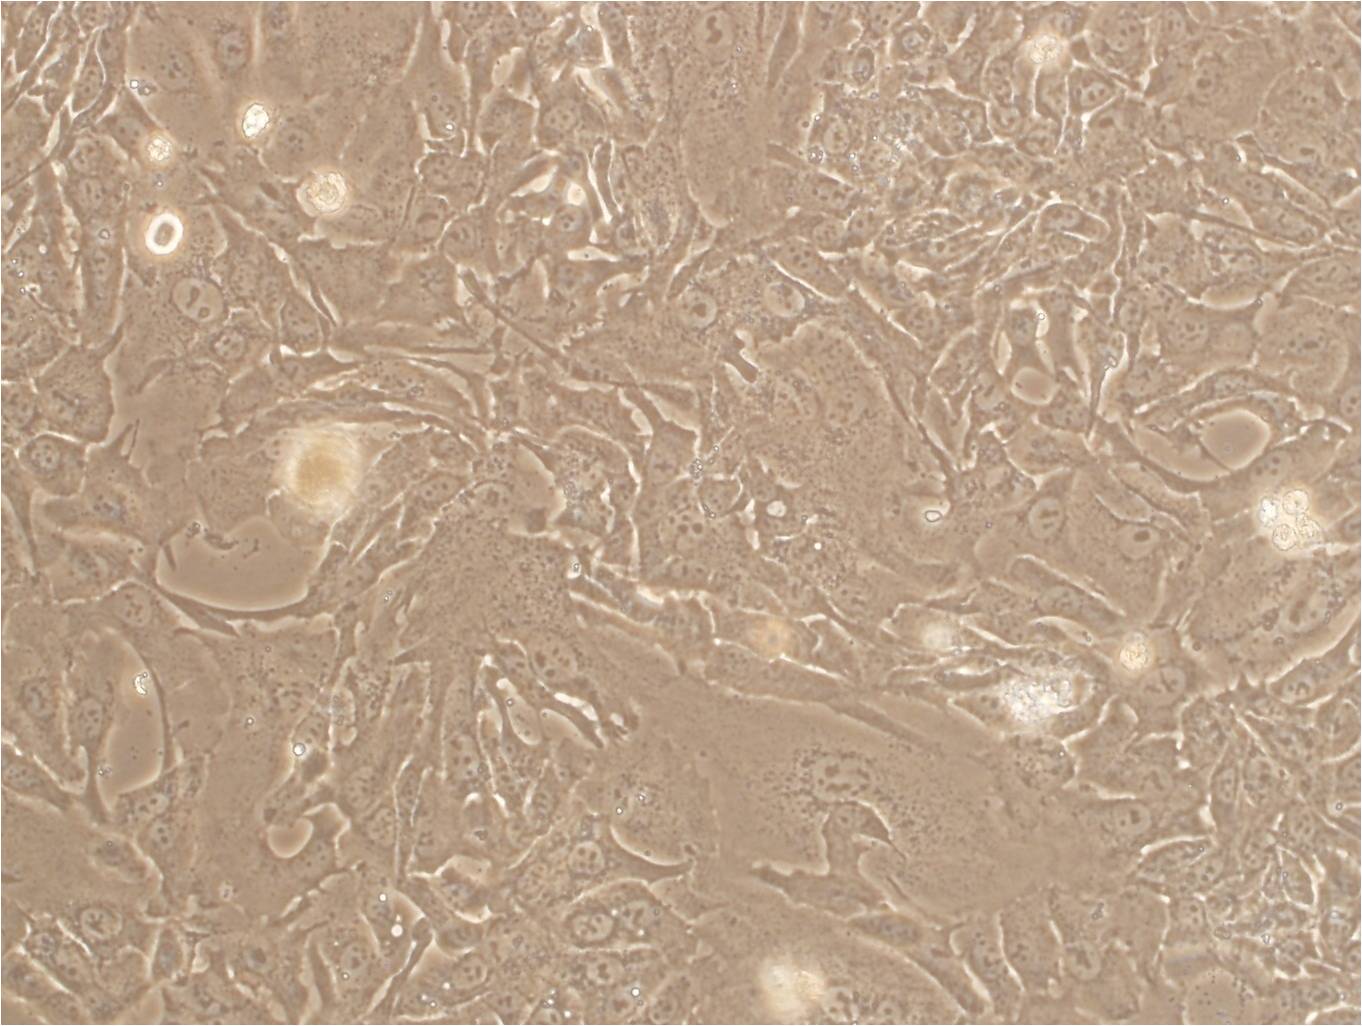 SK-NEP-1 epithelioid cells人肾母细胞瘤细胞系,SK-NEP-1 epithelioid cells